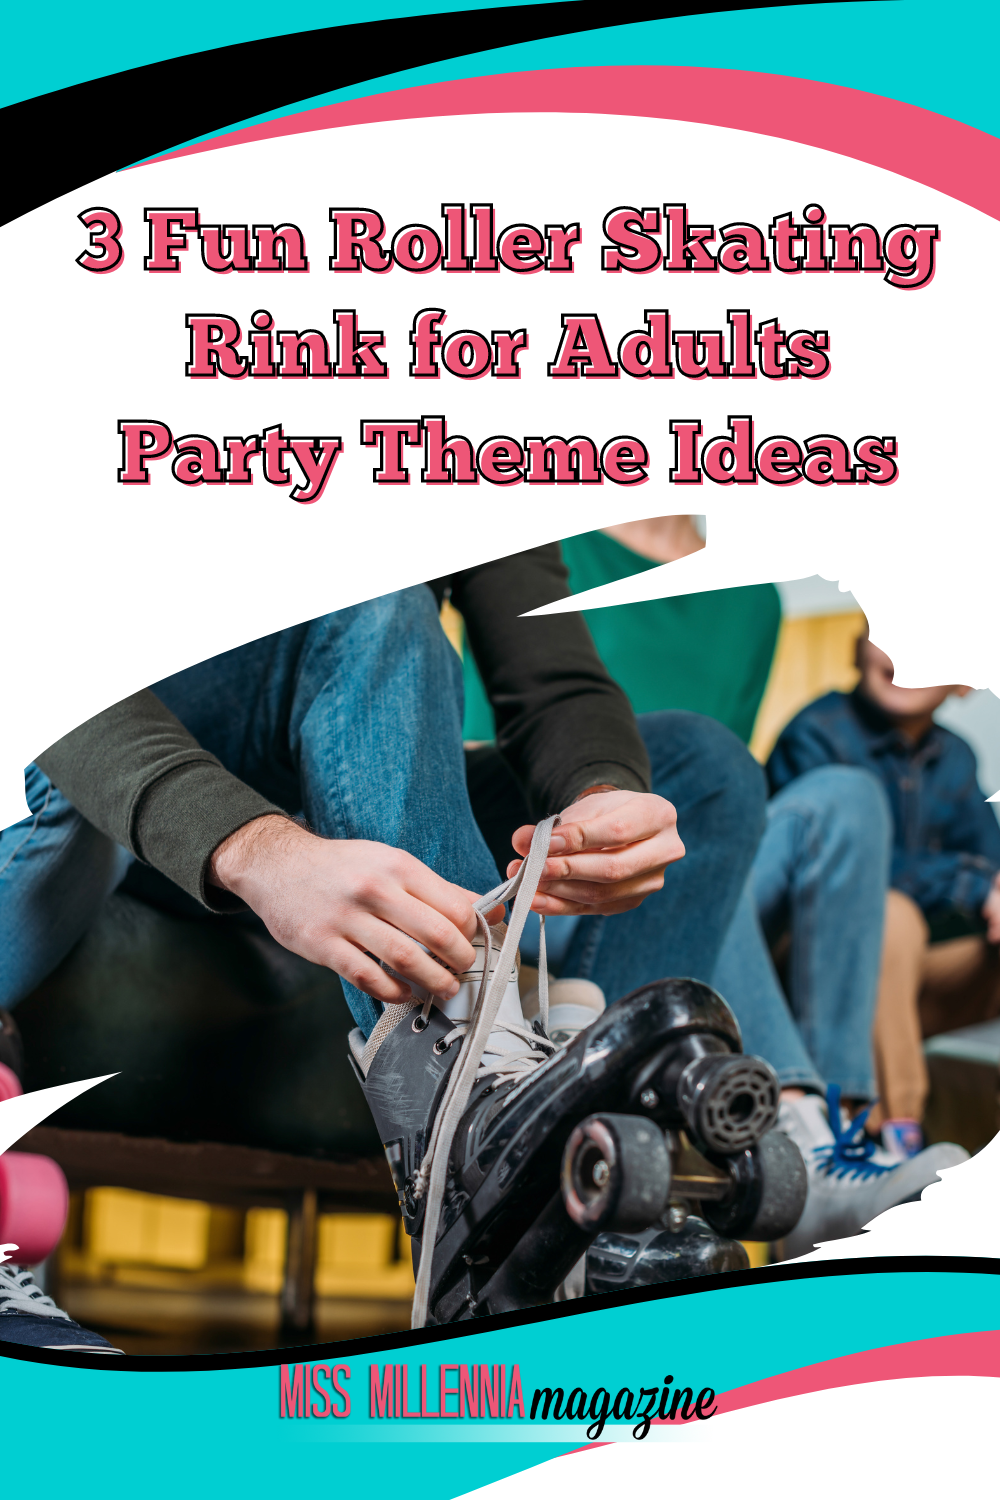 3 Fun Roller Skating Rink for Adults Party Theme Ideas